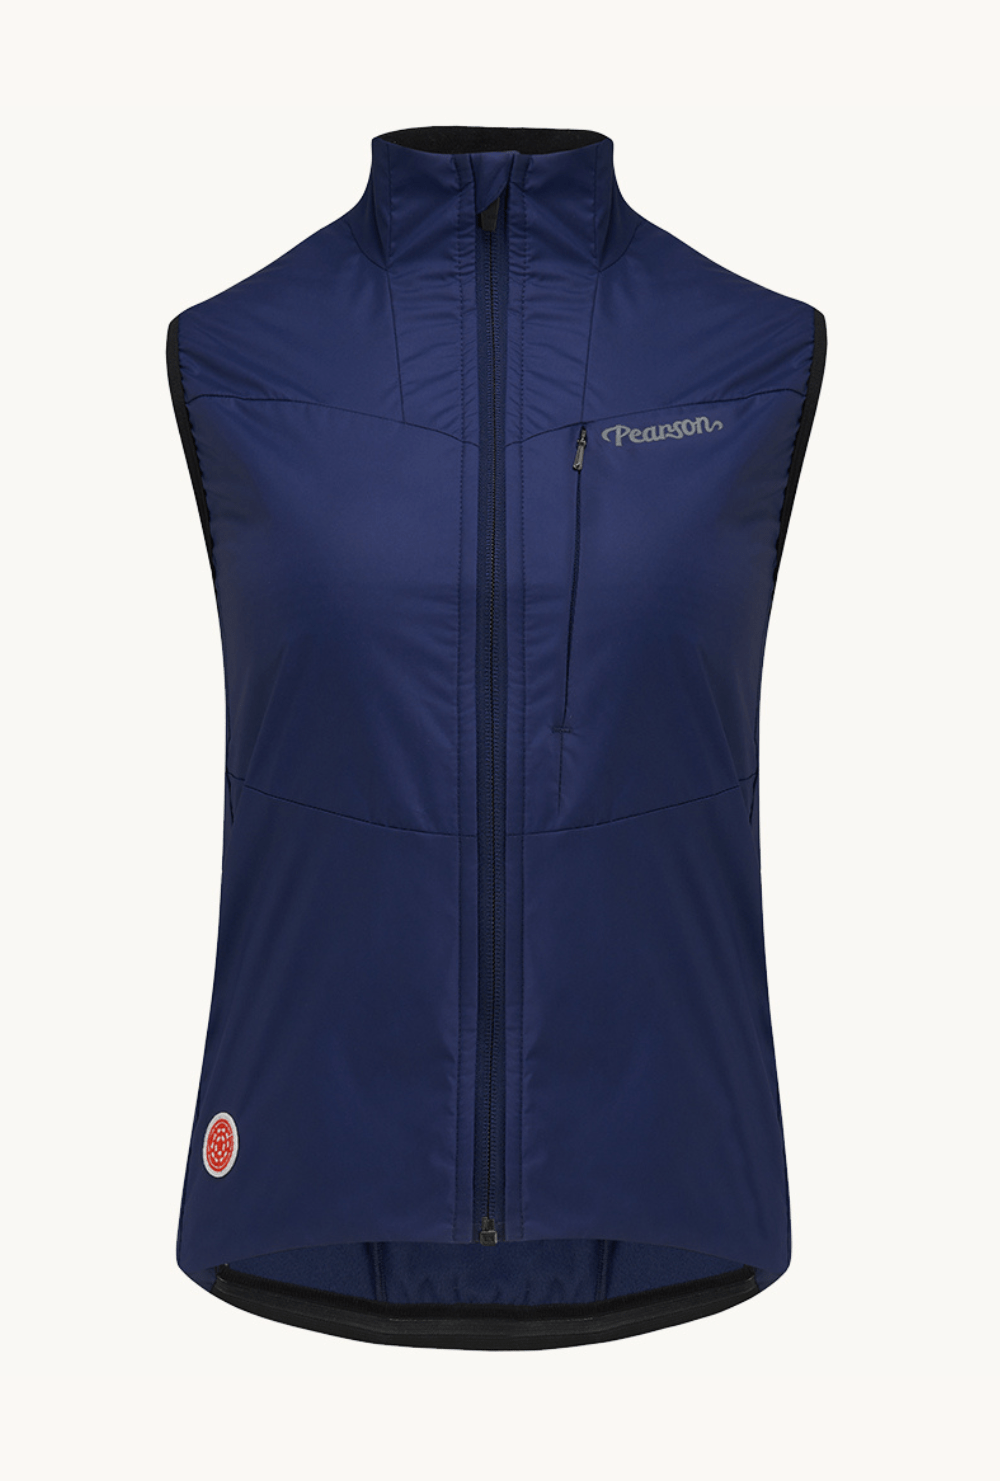 Pearson 1860  Feel The Benefits - Womens Road Insulated Gilet Blue Ink  Large / Blue Ink